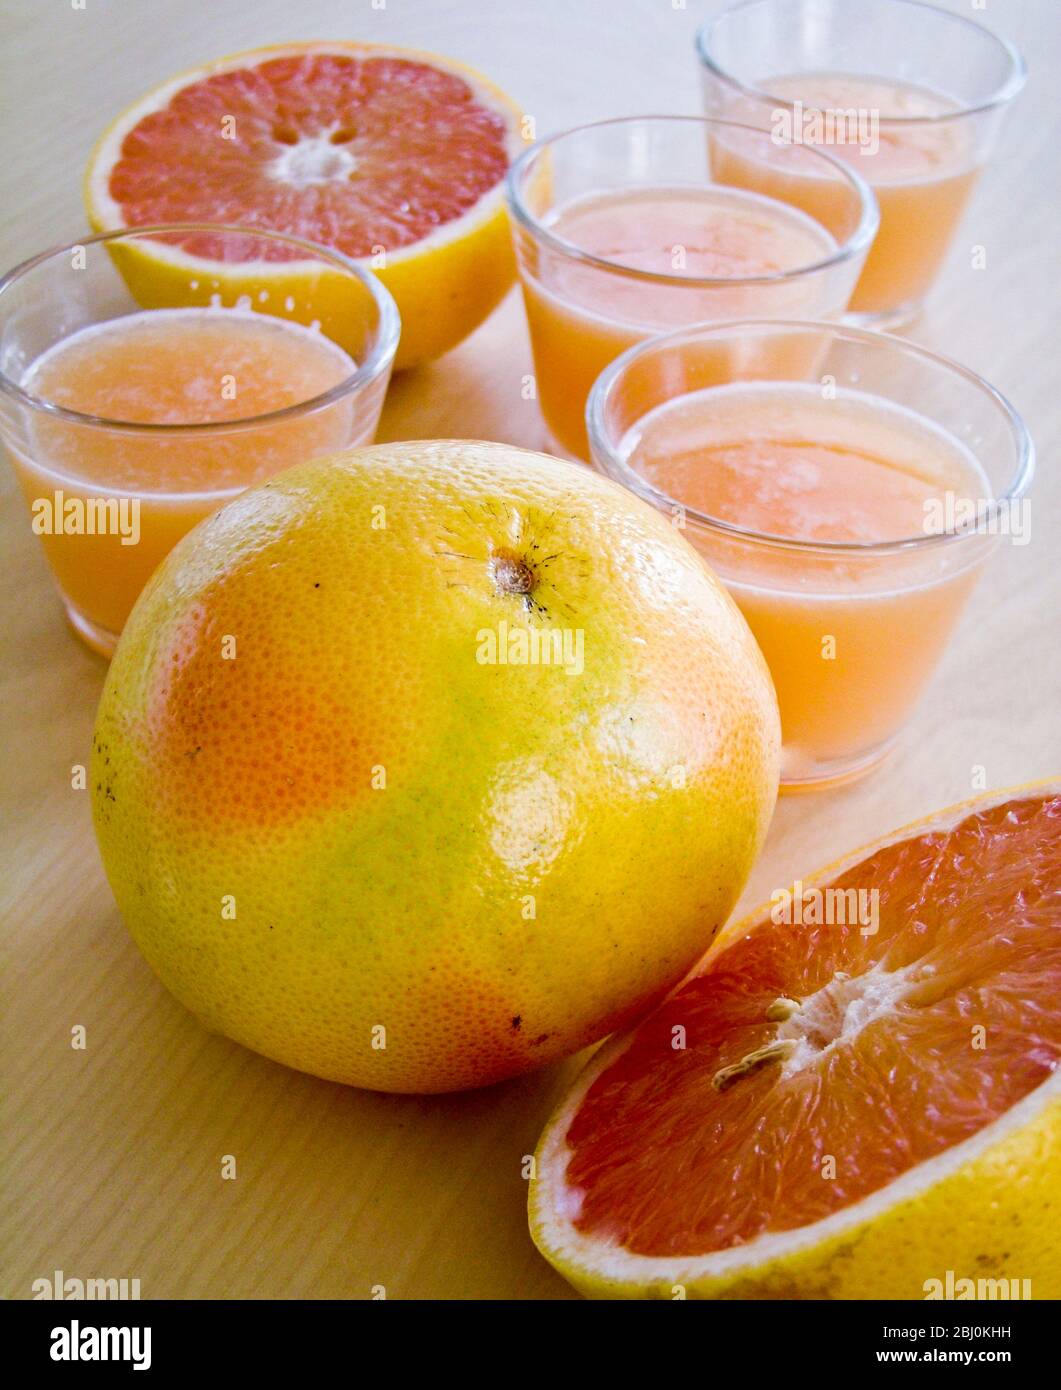 Little glasses of pink grapefruit juice with whole and halved grapefruit - Stock Photo